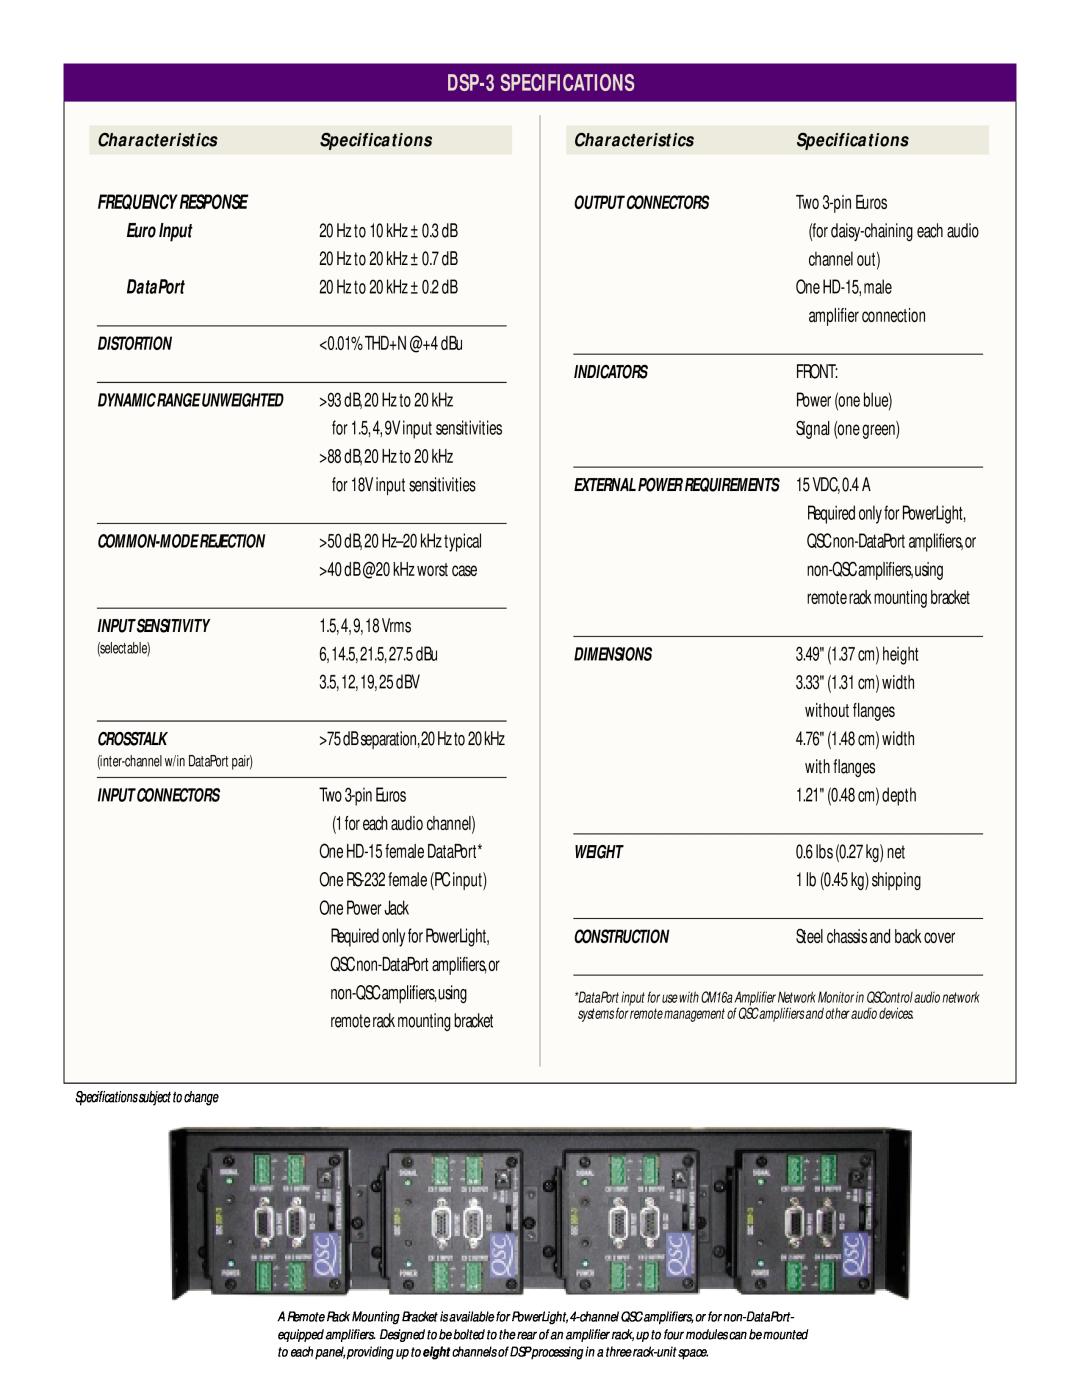 QSC Audio manual DSP-3SPECIFICATIONS, 1.5, 4, 9, 18 Vrms, 6, 14.5, 21.5, 27.5 dBu, 3.5, 12, 19, 25 dBV, Two 3-pinEuros 